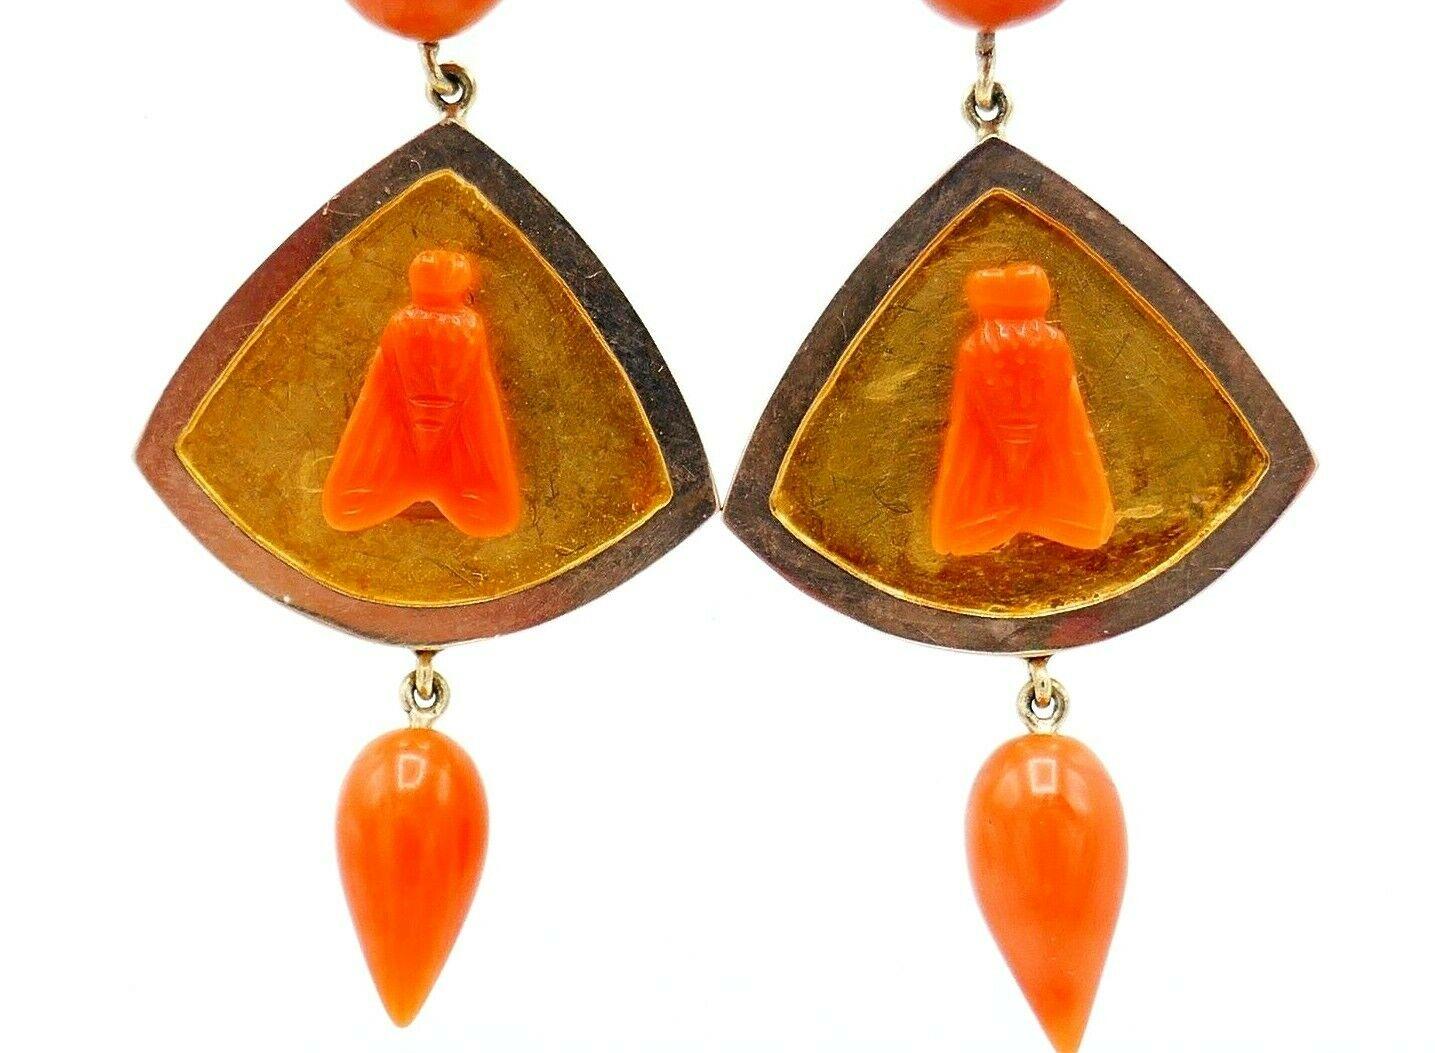 Cute Antique dangling earrings made of 14k yellow and rose gold featuring carved and cabochon coral.  
Measurements: 2 1/8